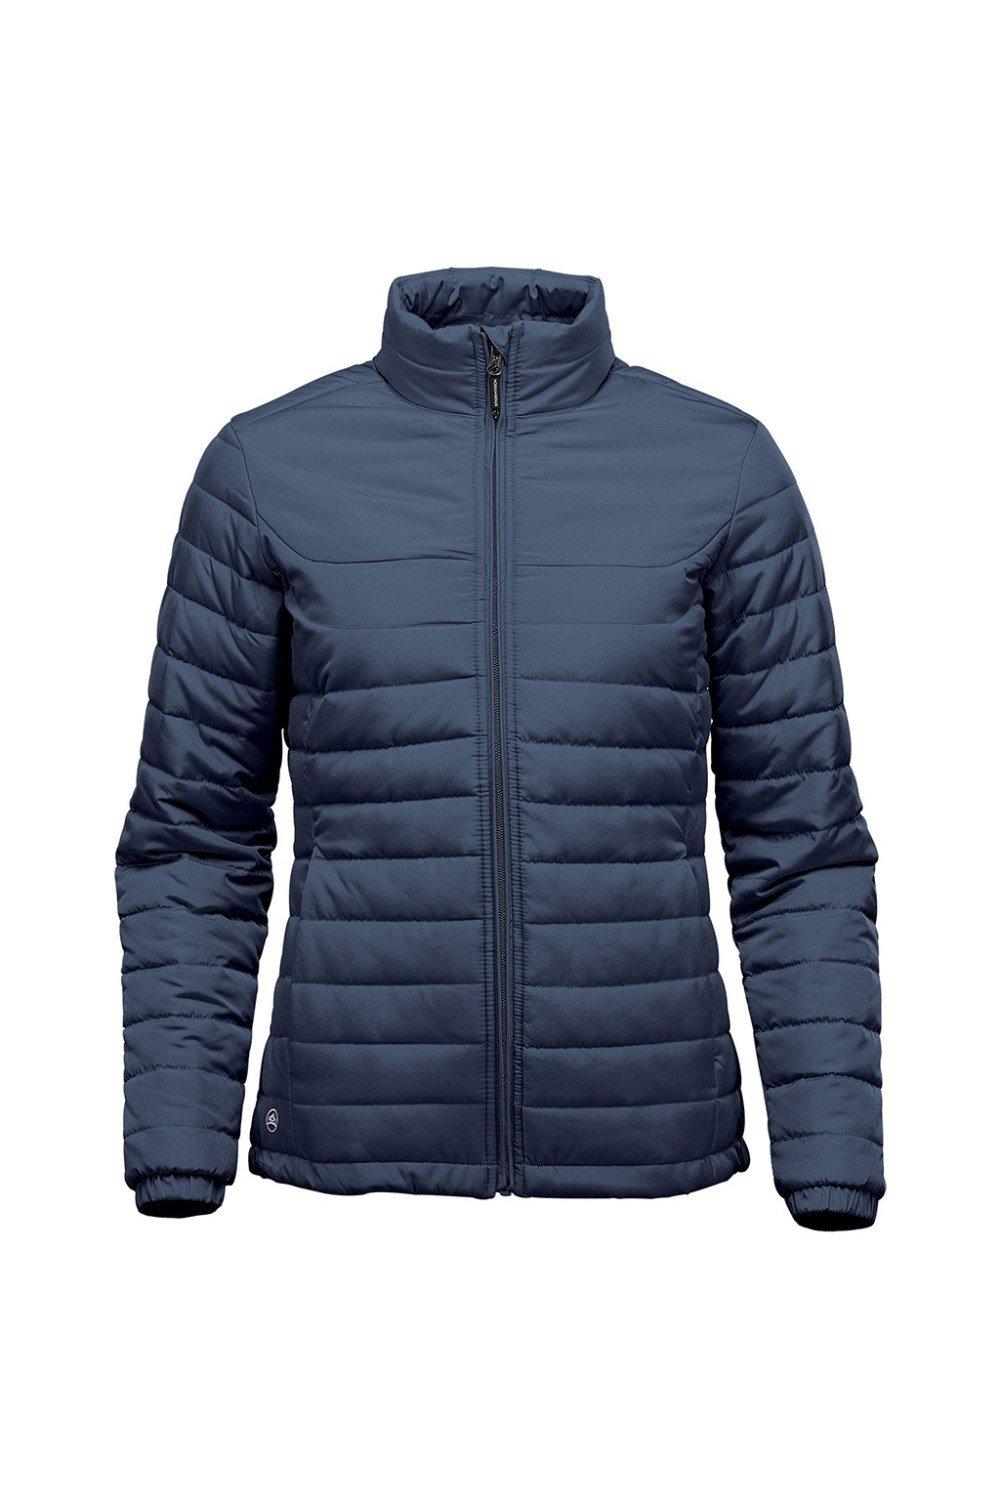 Stormtech Women's Nautilus Quilted Padded Jacket|Size: L|navy